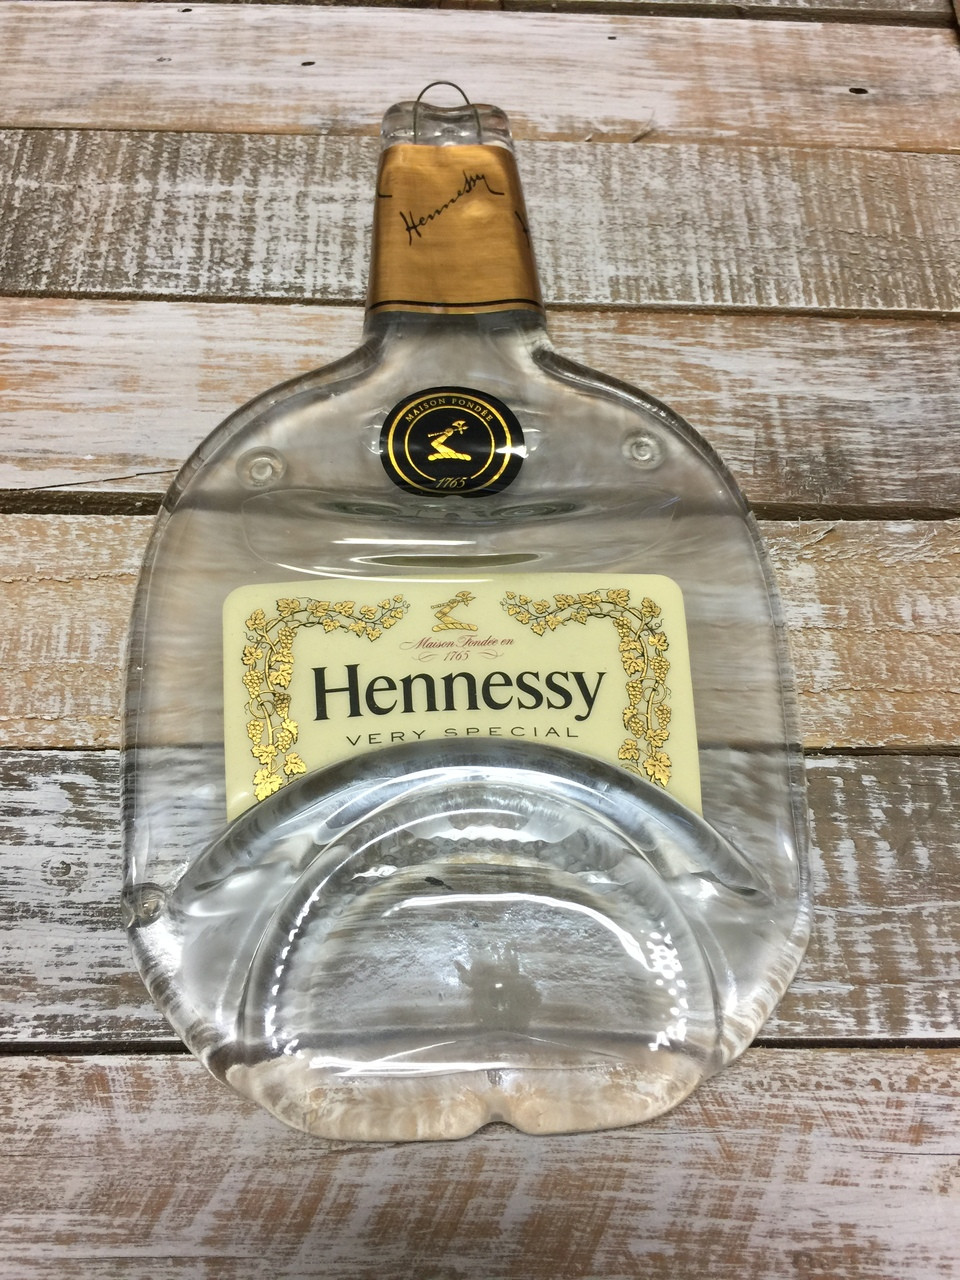 Hennessy, Product categories